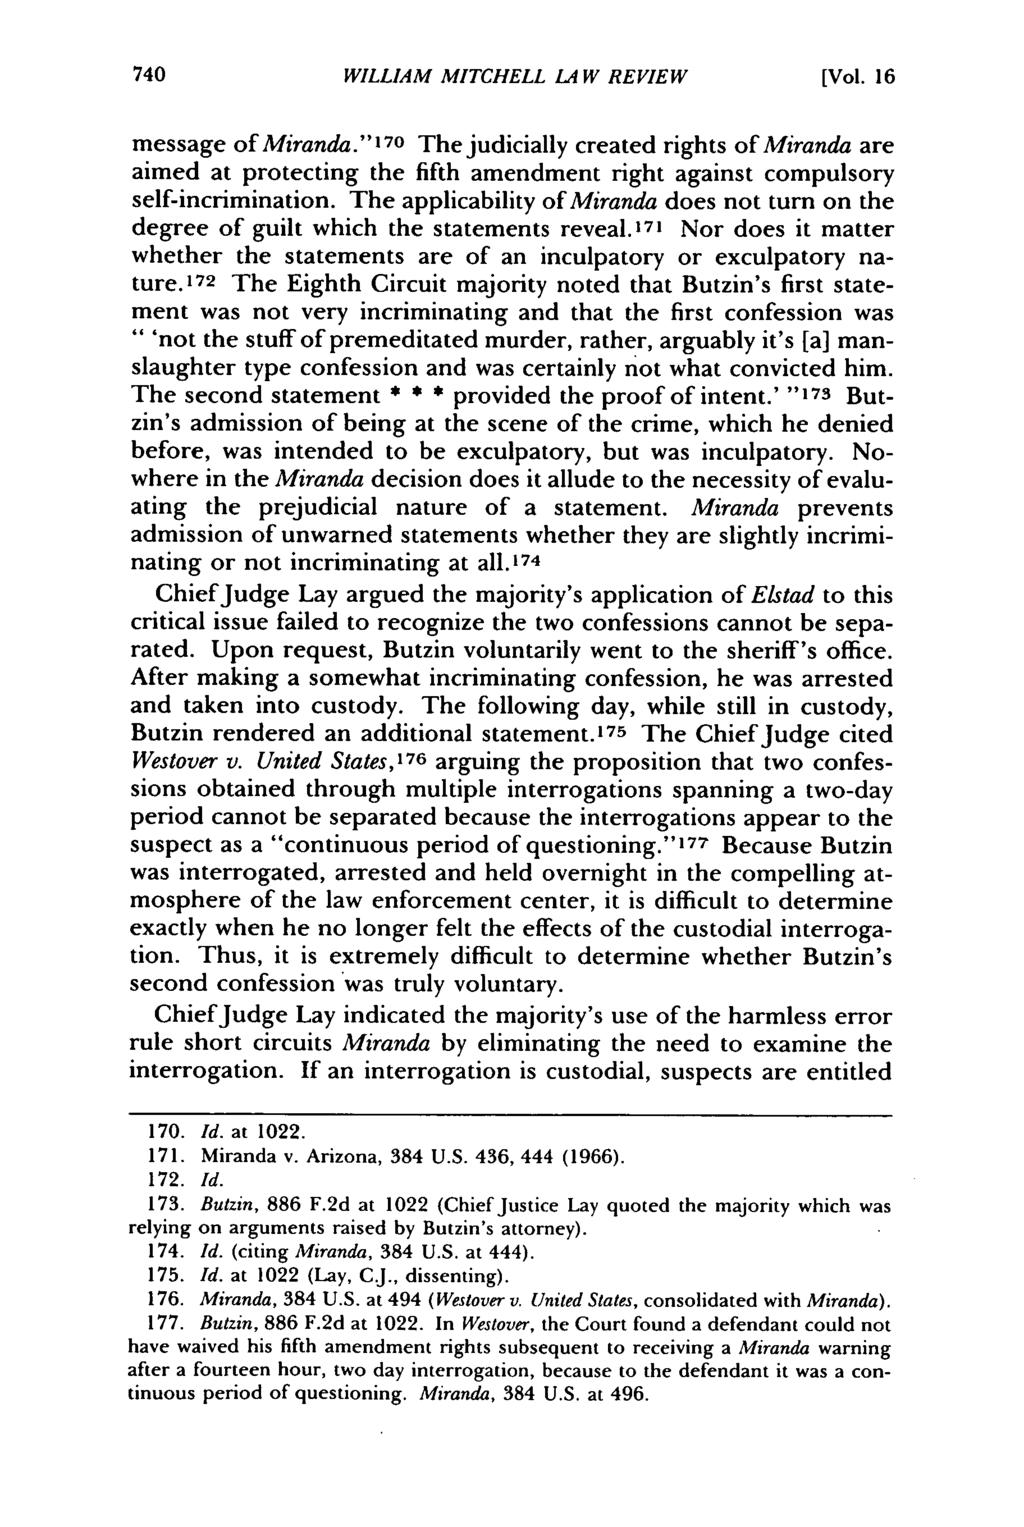 William Mitchell Law Review, Vol. 16, Iss. 3 [1990], Art. 7 WILLIAM MITCHELL LA W REVIEW [Vol. 16 message of Miranda.